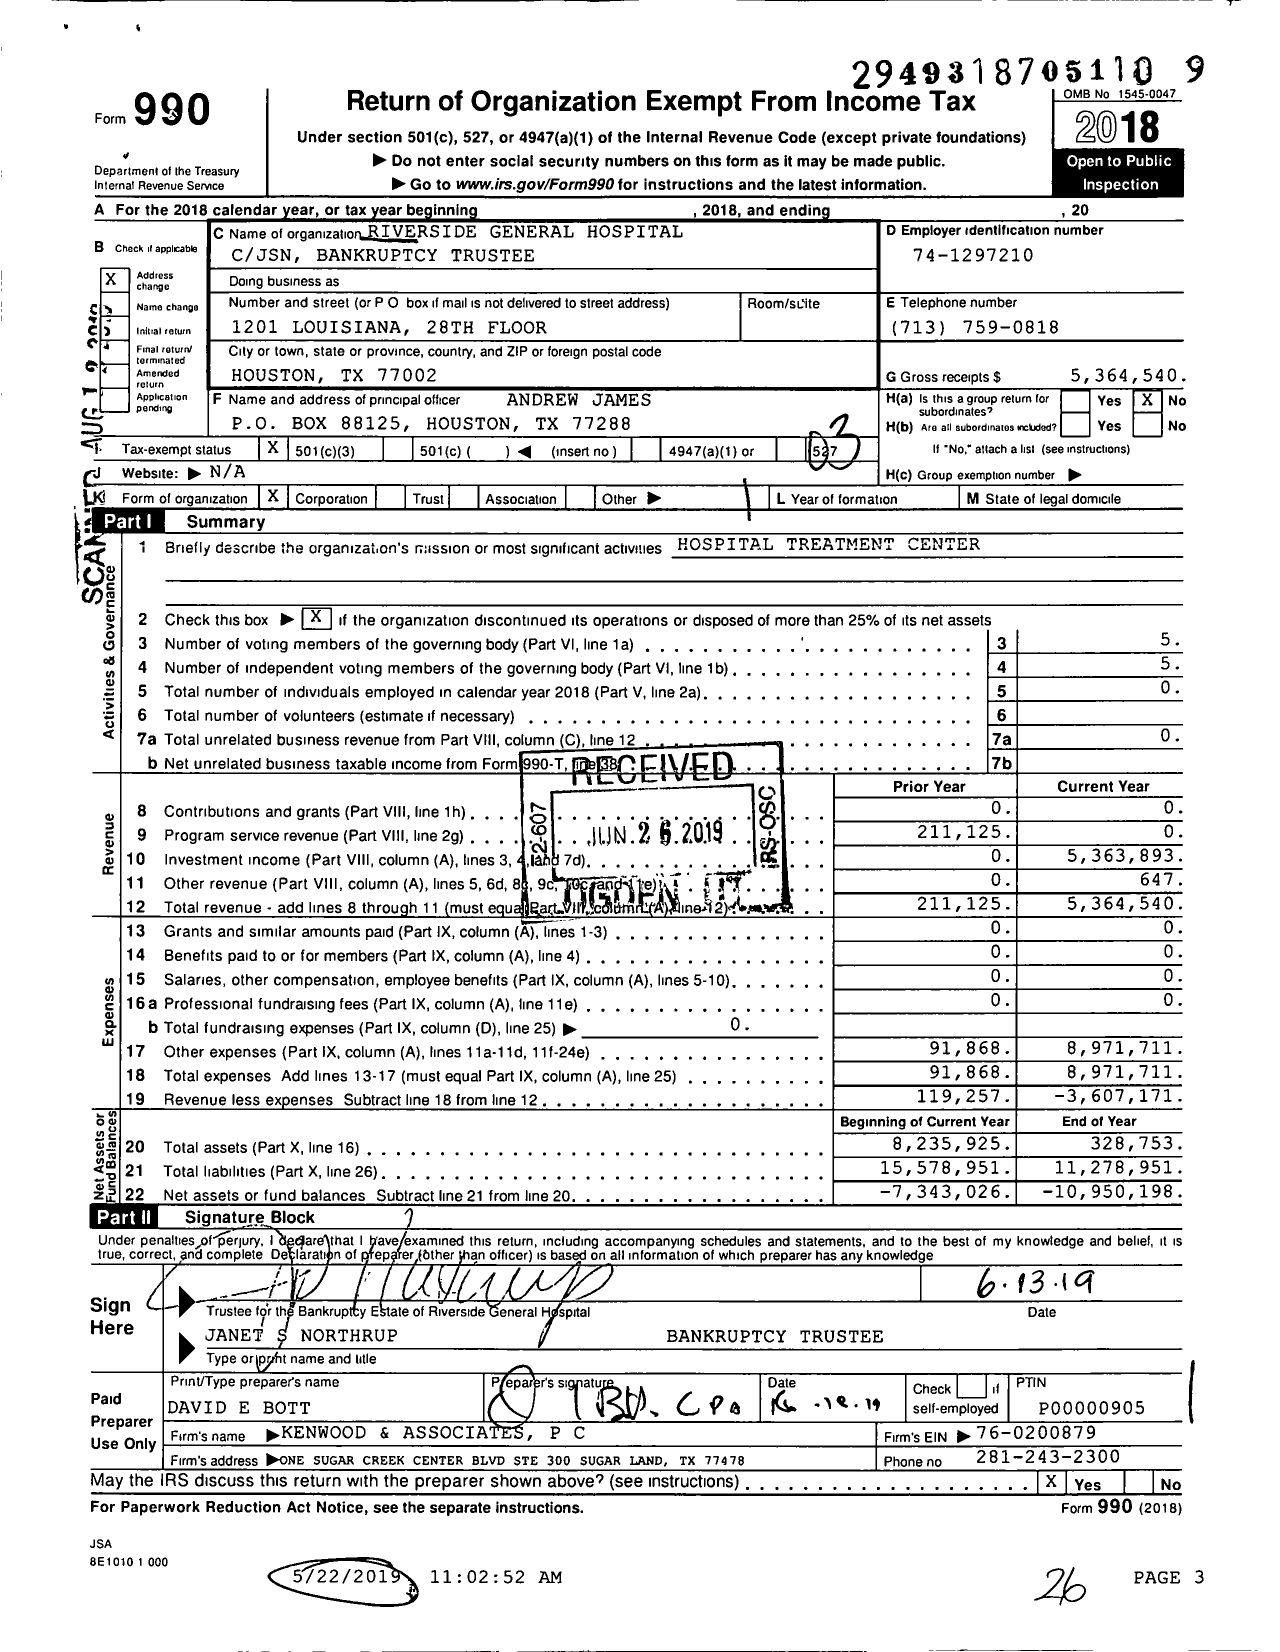 Image of first page of 2018 Form 990 for Riverside General Hospital (RGH)